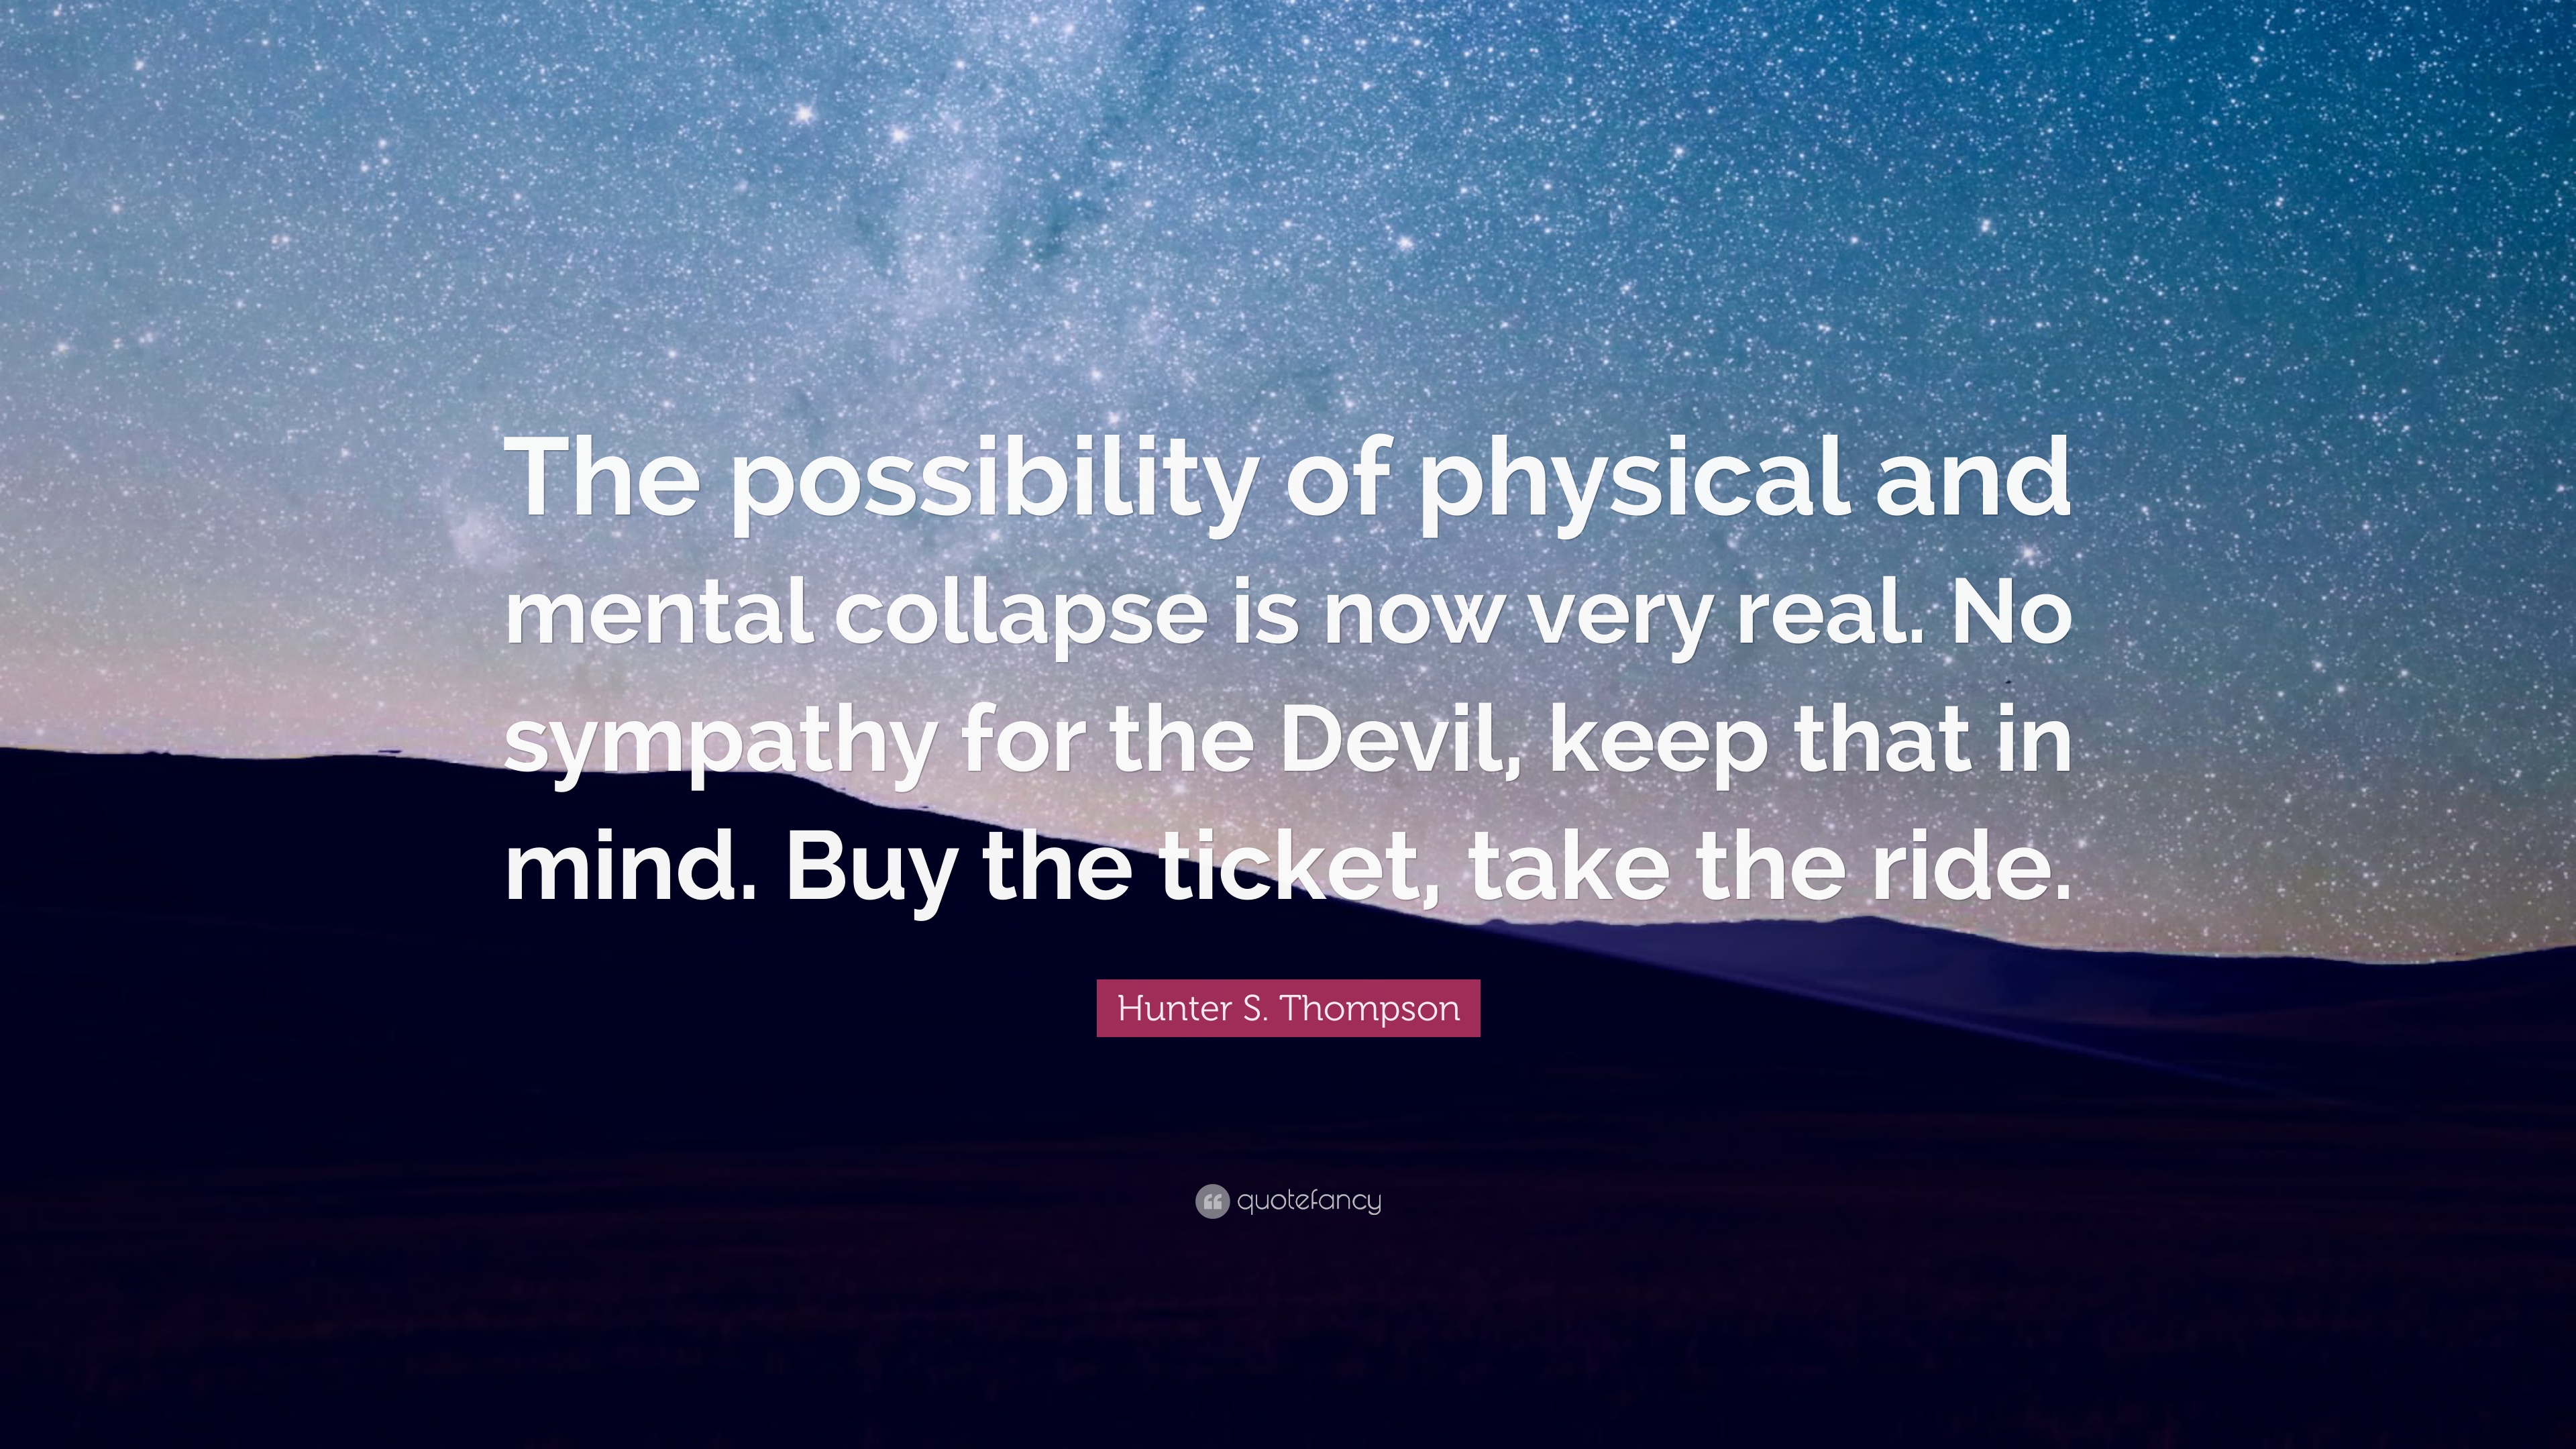 Hunter S. Thompson Quote: “The possibility of physical